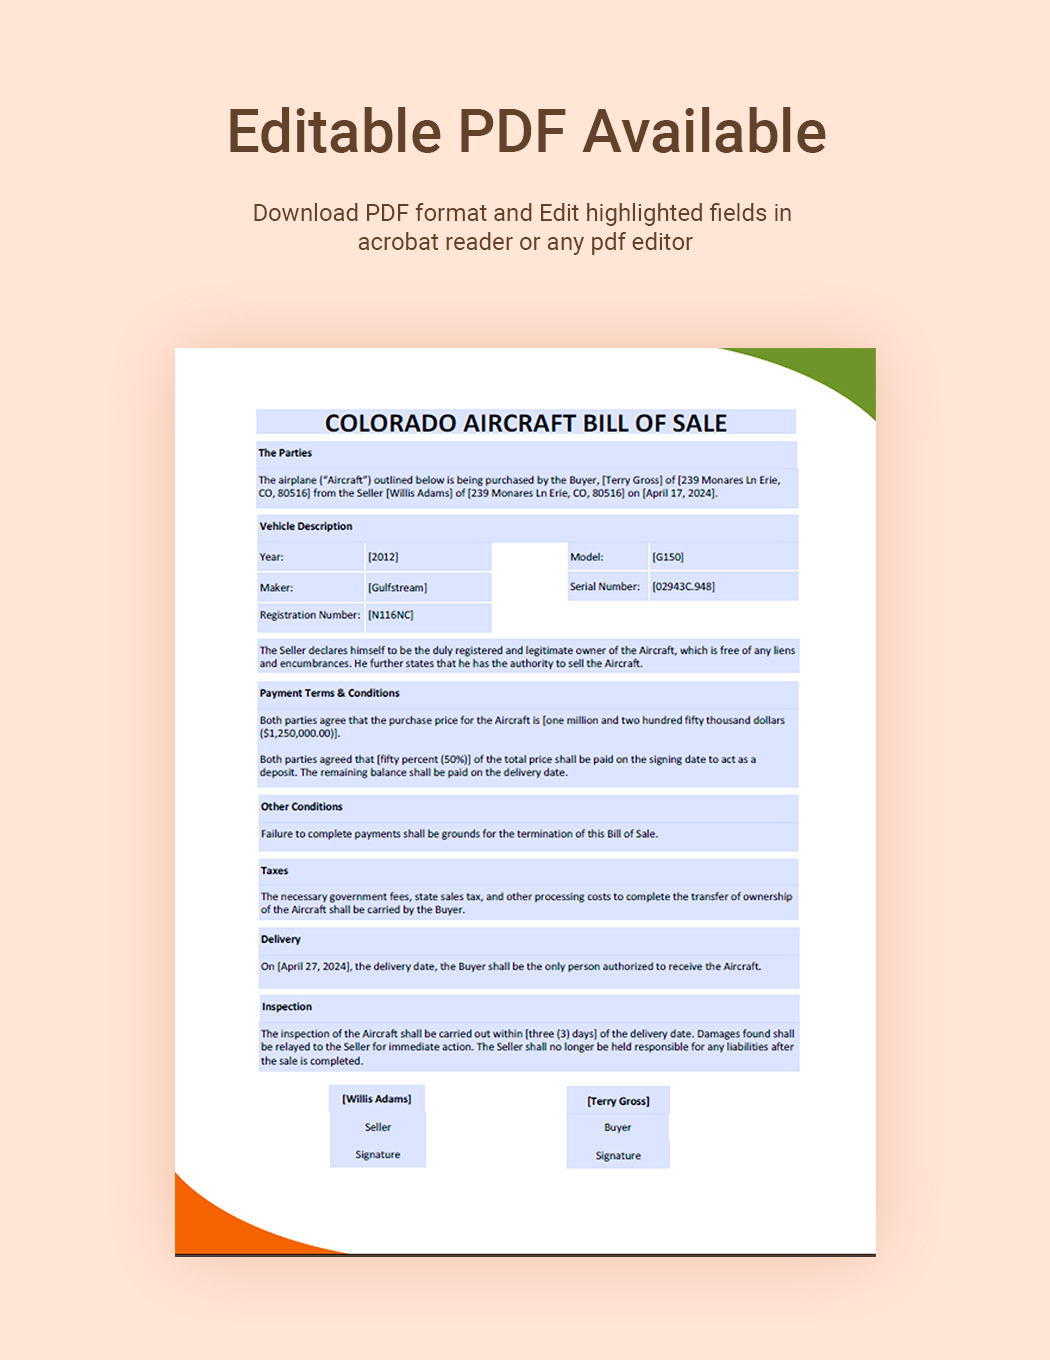 Colorado Aircraft / Airplane Bill Of Sale Template